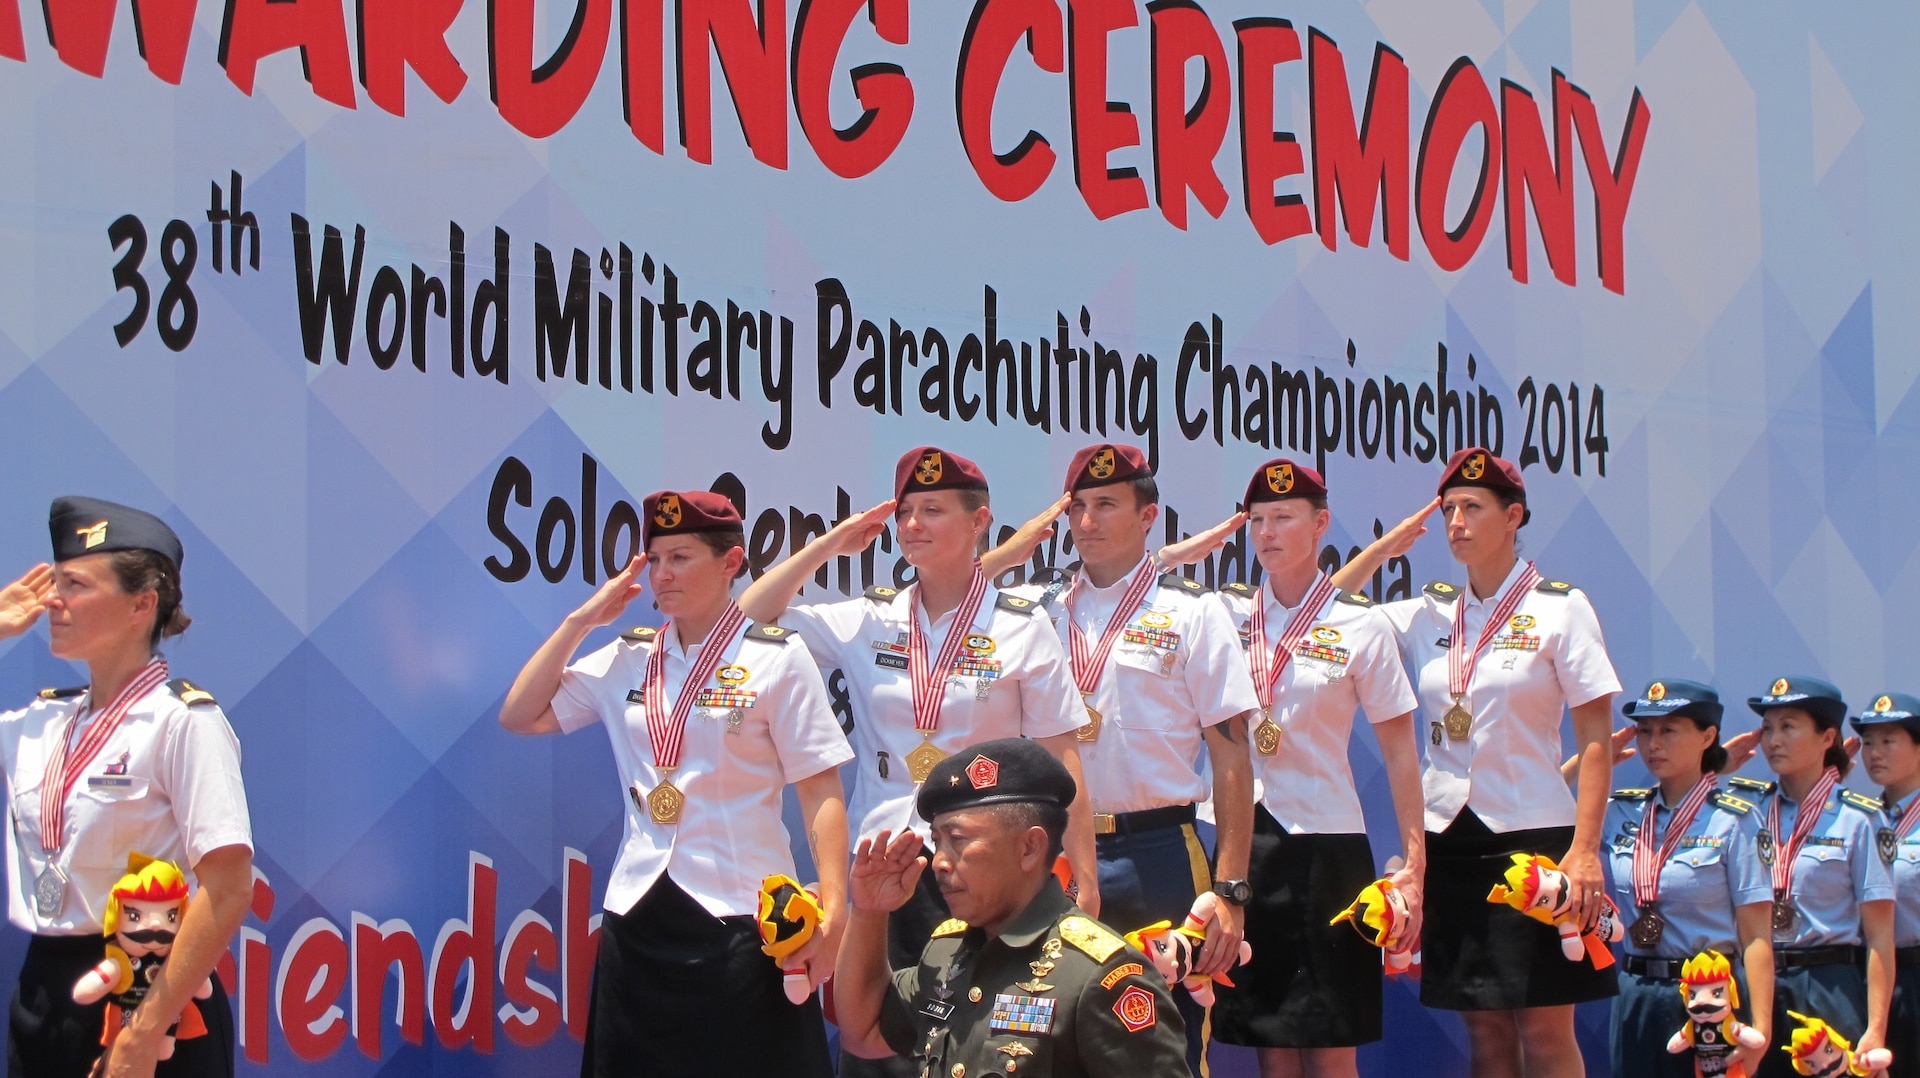 US Women's team on the podium salute as the US National Anthem plays at the 38th Conseil International du Sport Militaire (CISM) in Solo, Indonesia 17-28 September